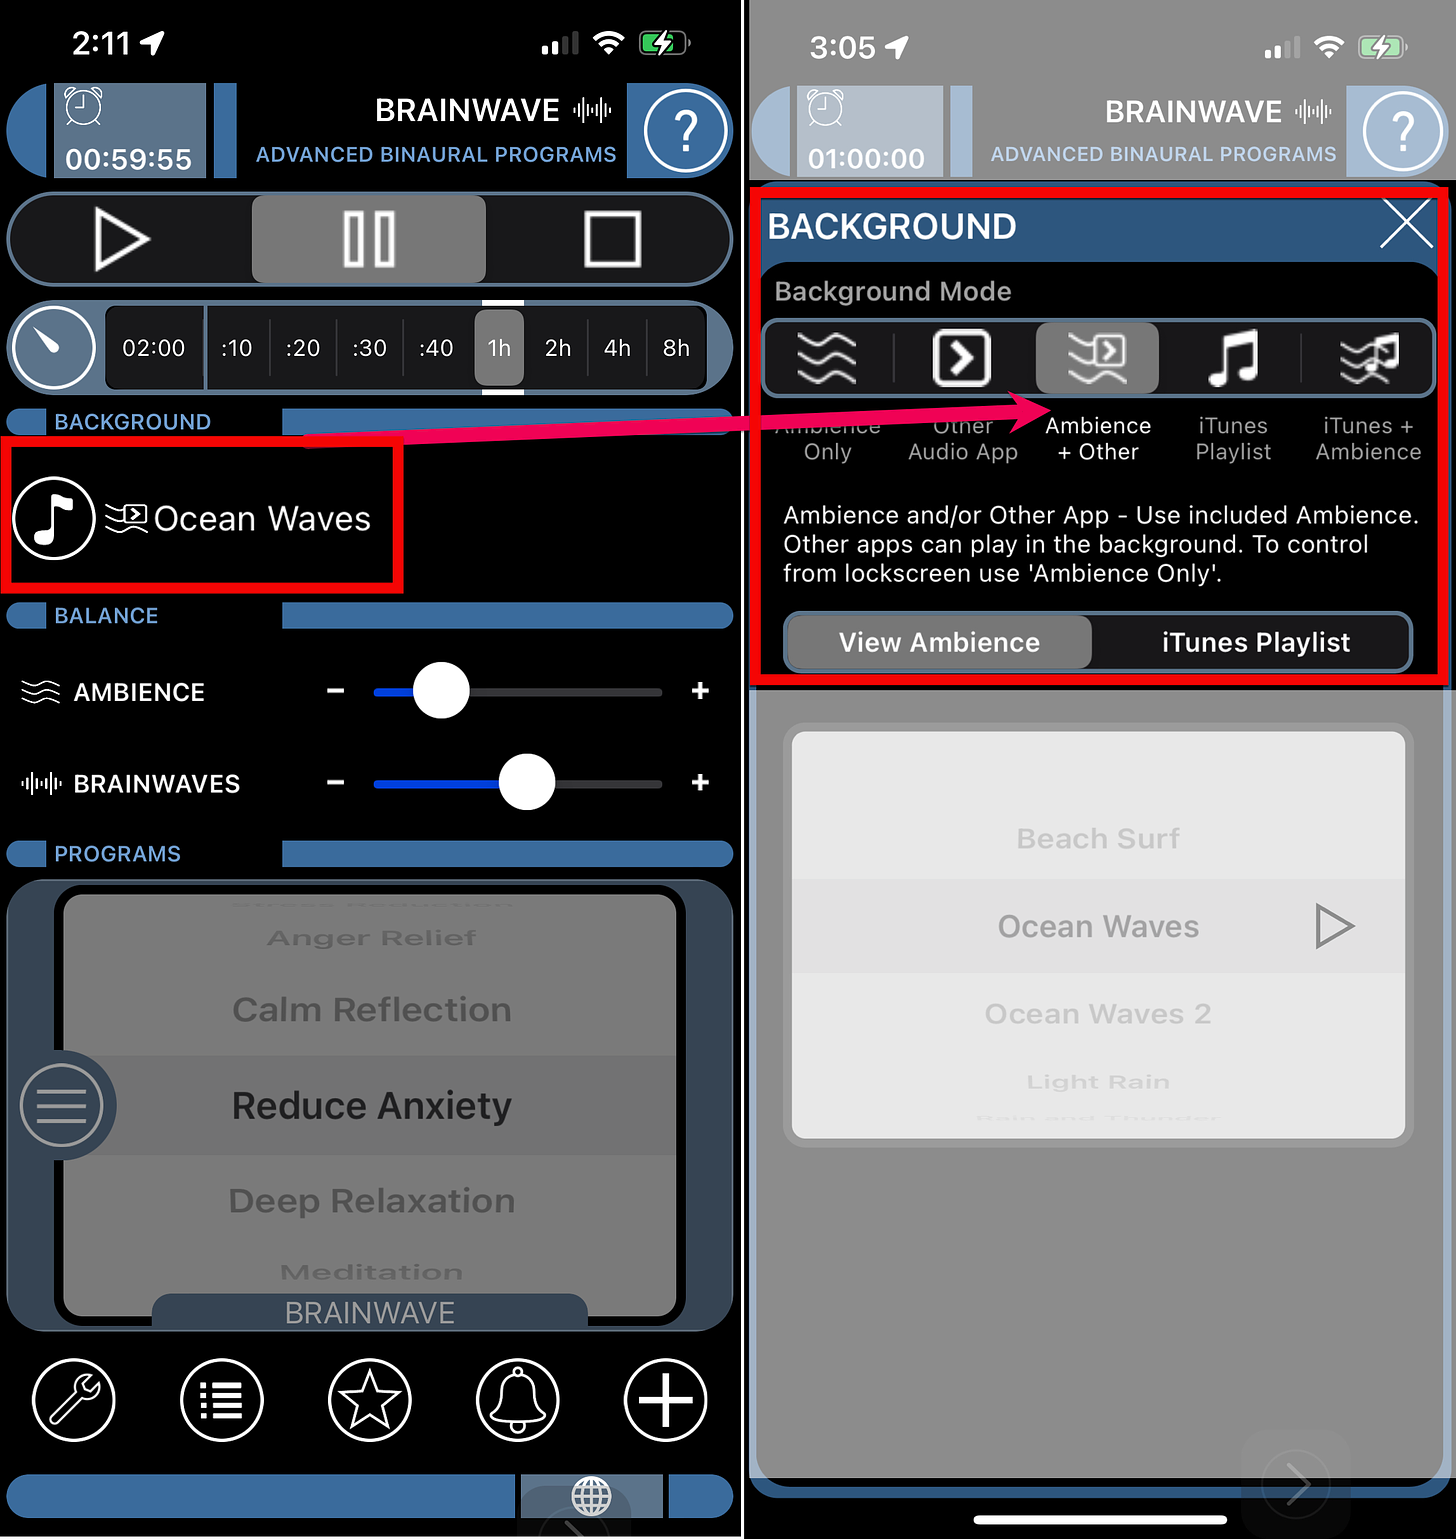 Brainwave Ambiance + Other Settings